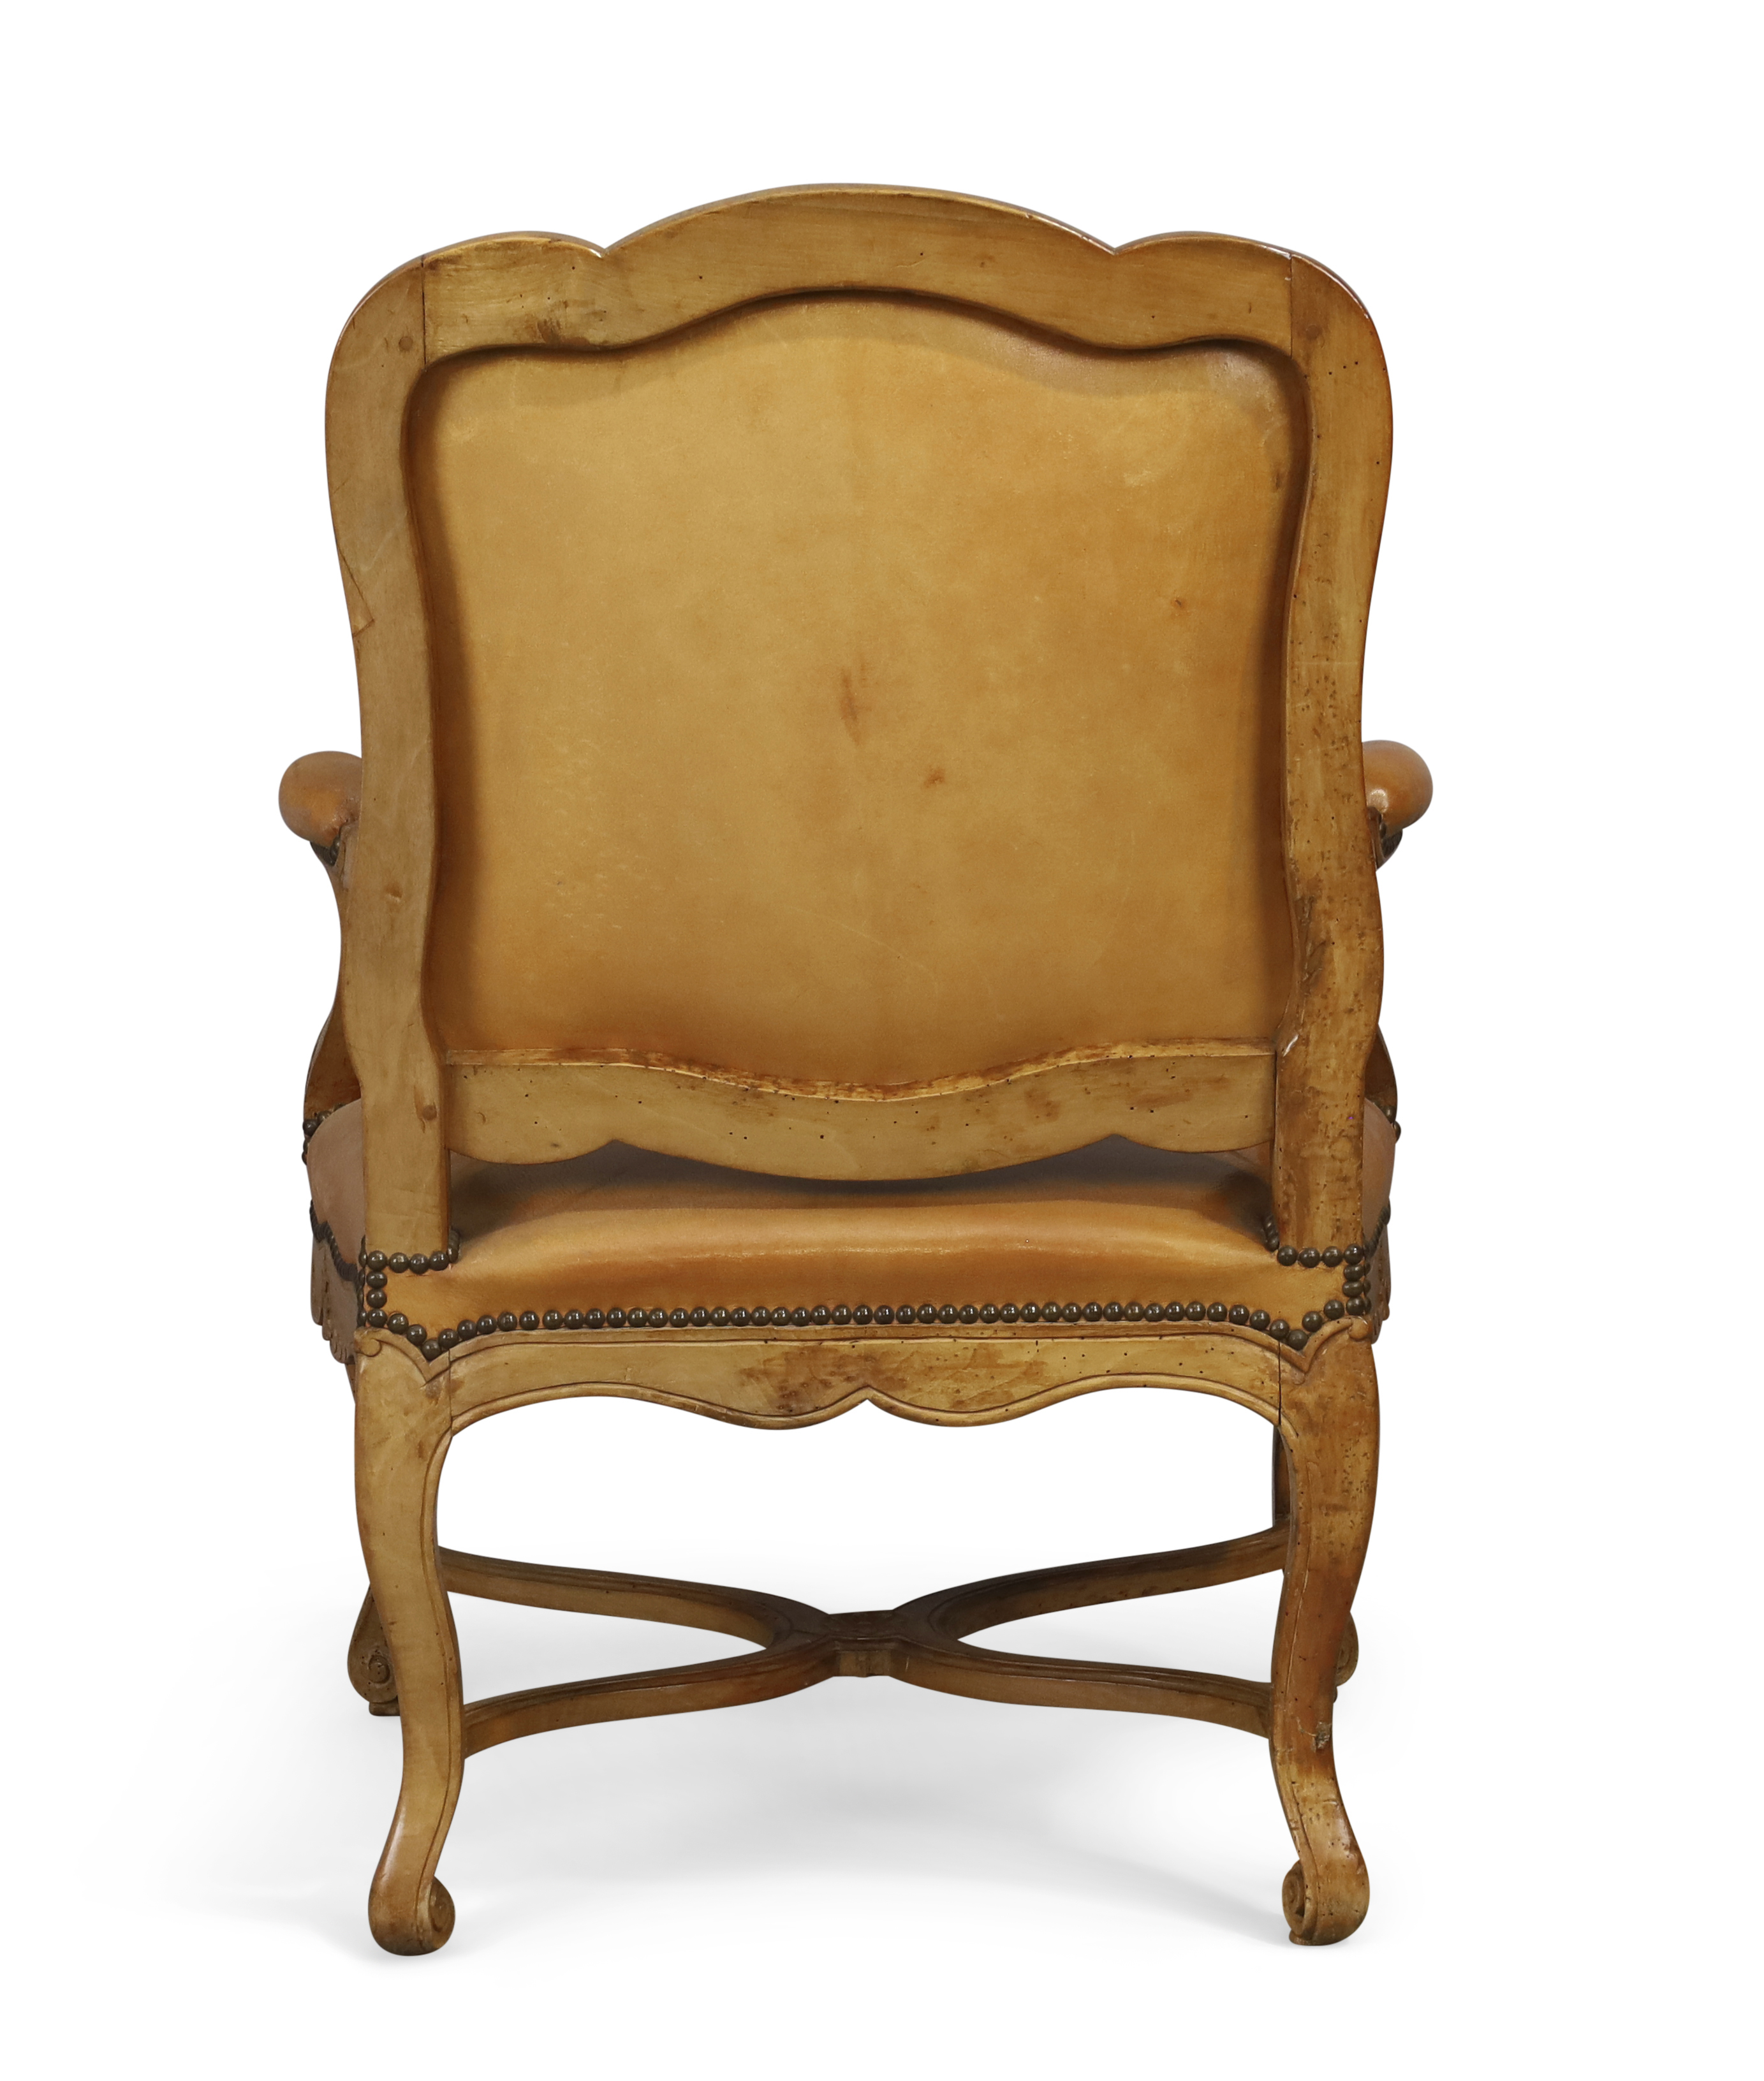 A pair of French walnut fauteuils, Of Regence style, first quarter 19th century, Each with carved... - Image 4 of 5